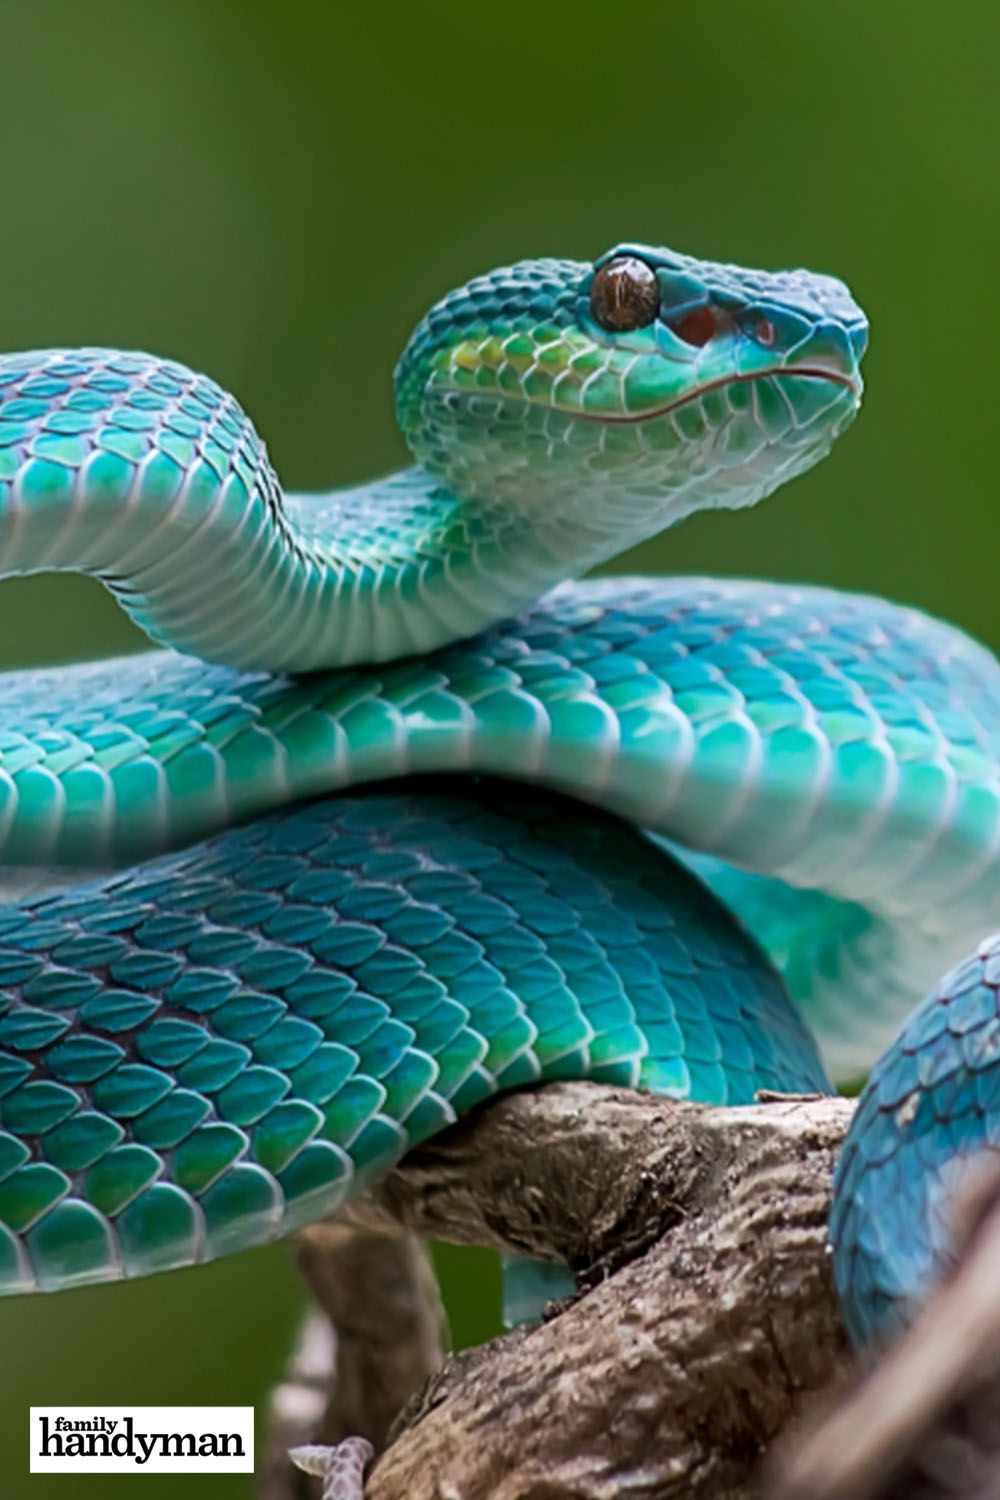 How to Avoid Snakes Slithering Up Your Toilet. Snake, Beautiful snakes, Animals